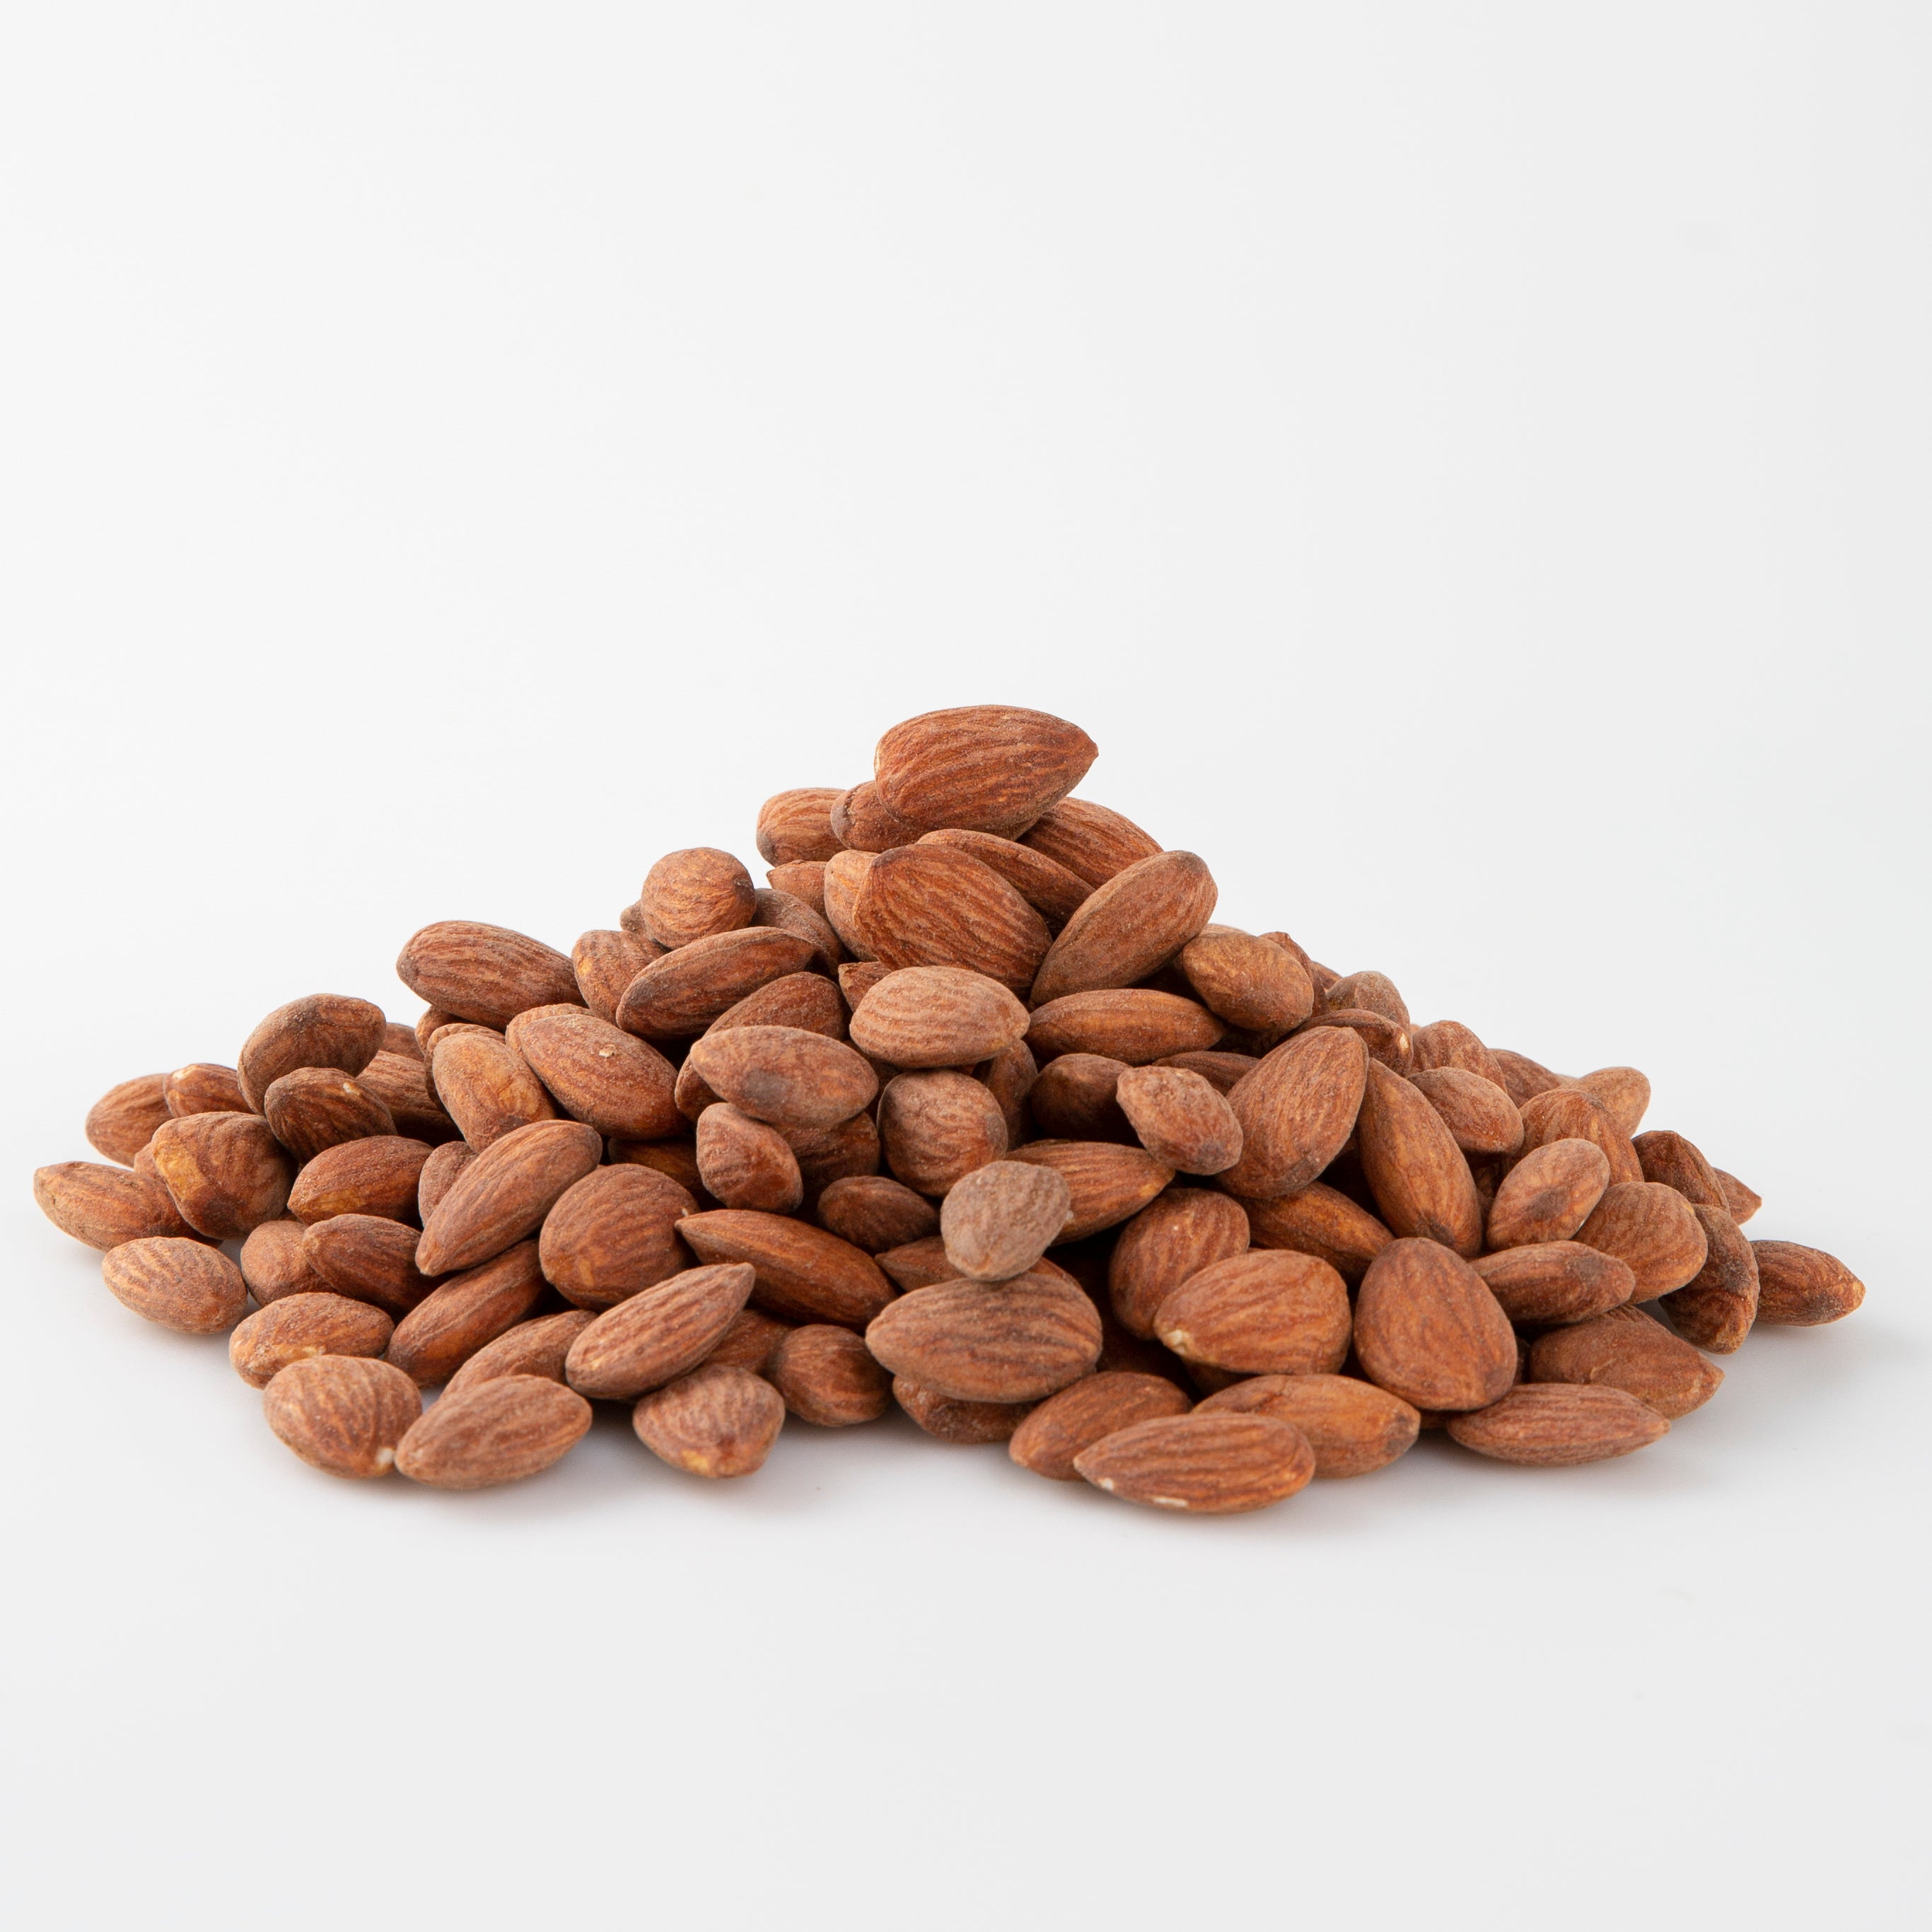 Roasted Unsalted Almonds (Roasted Nuts) Image 1 - Naked Foods